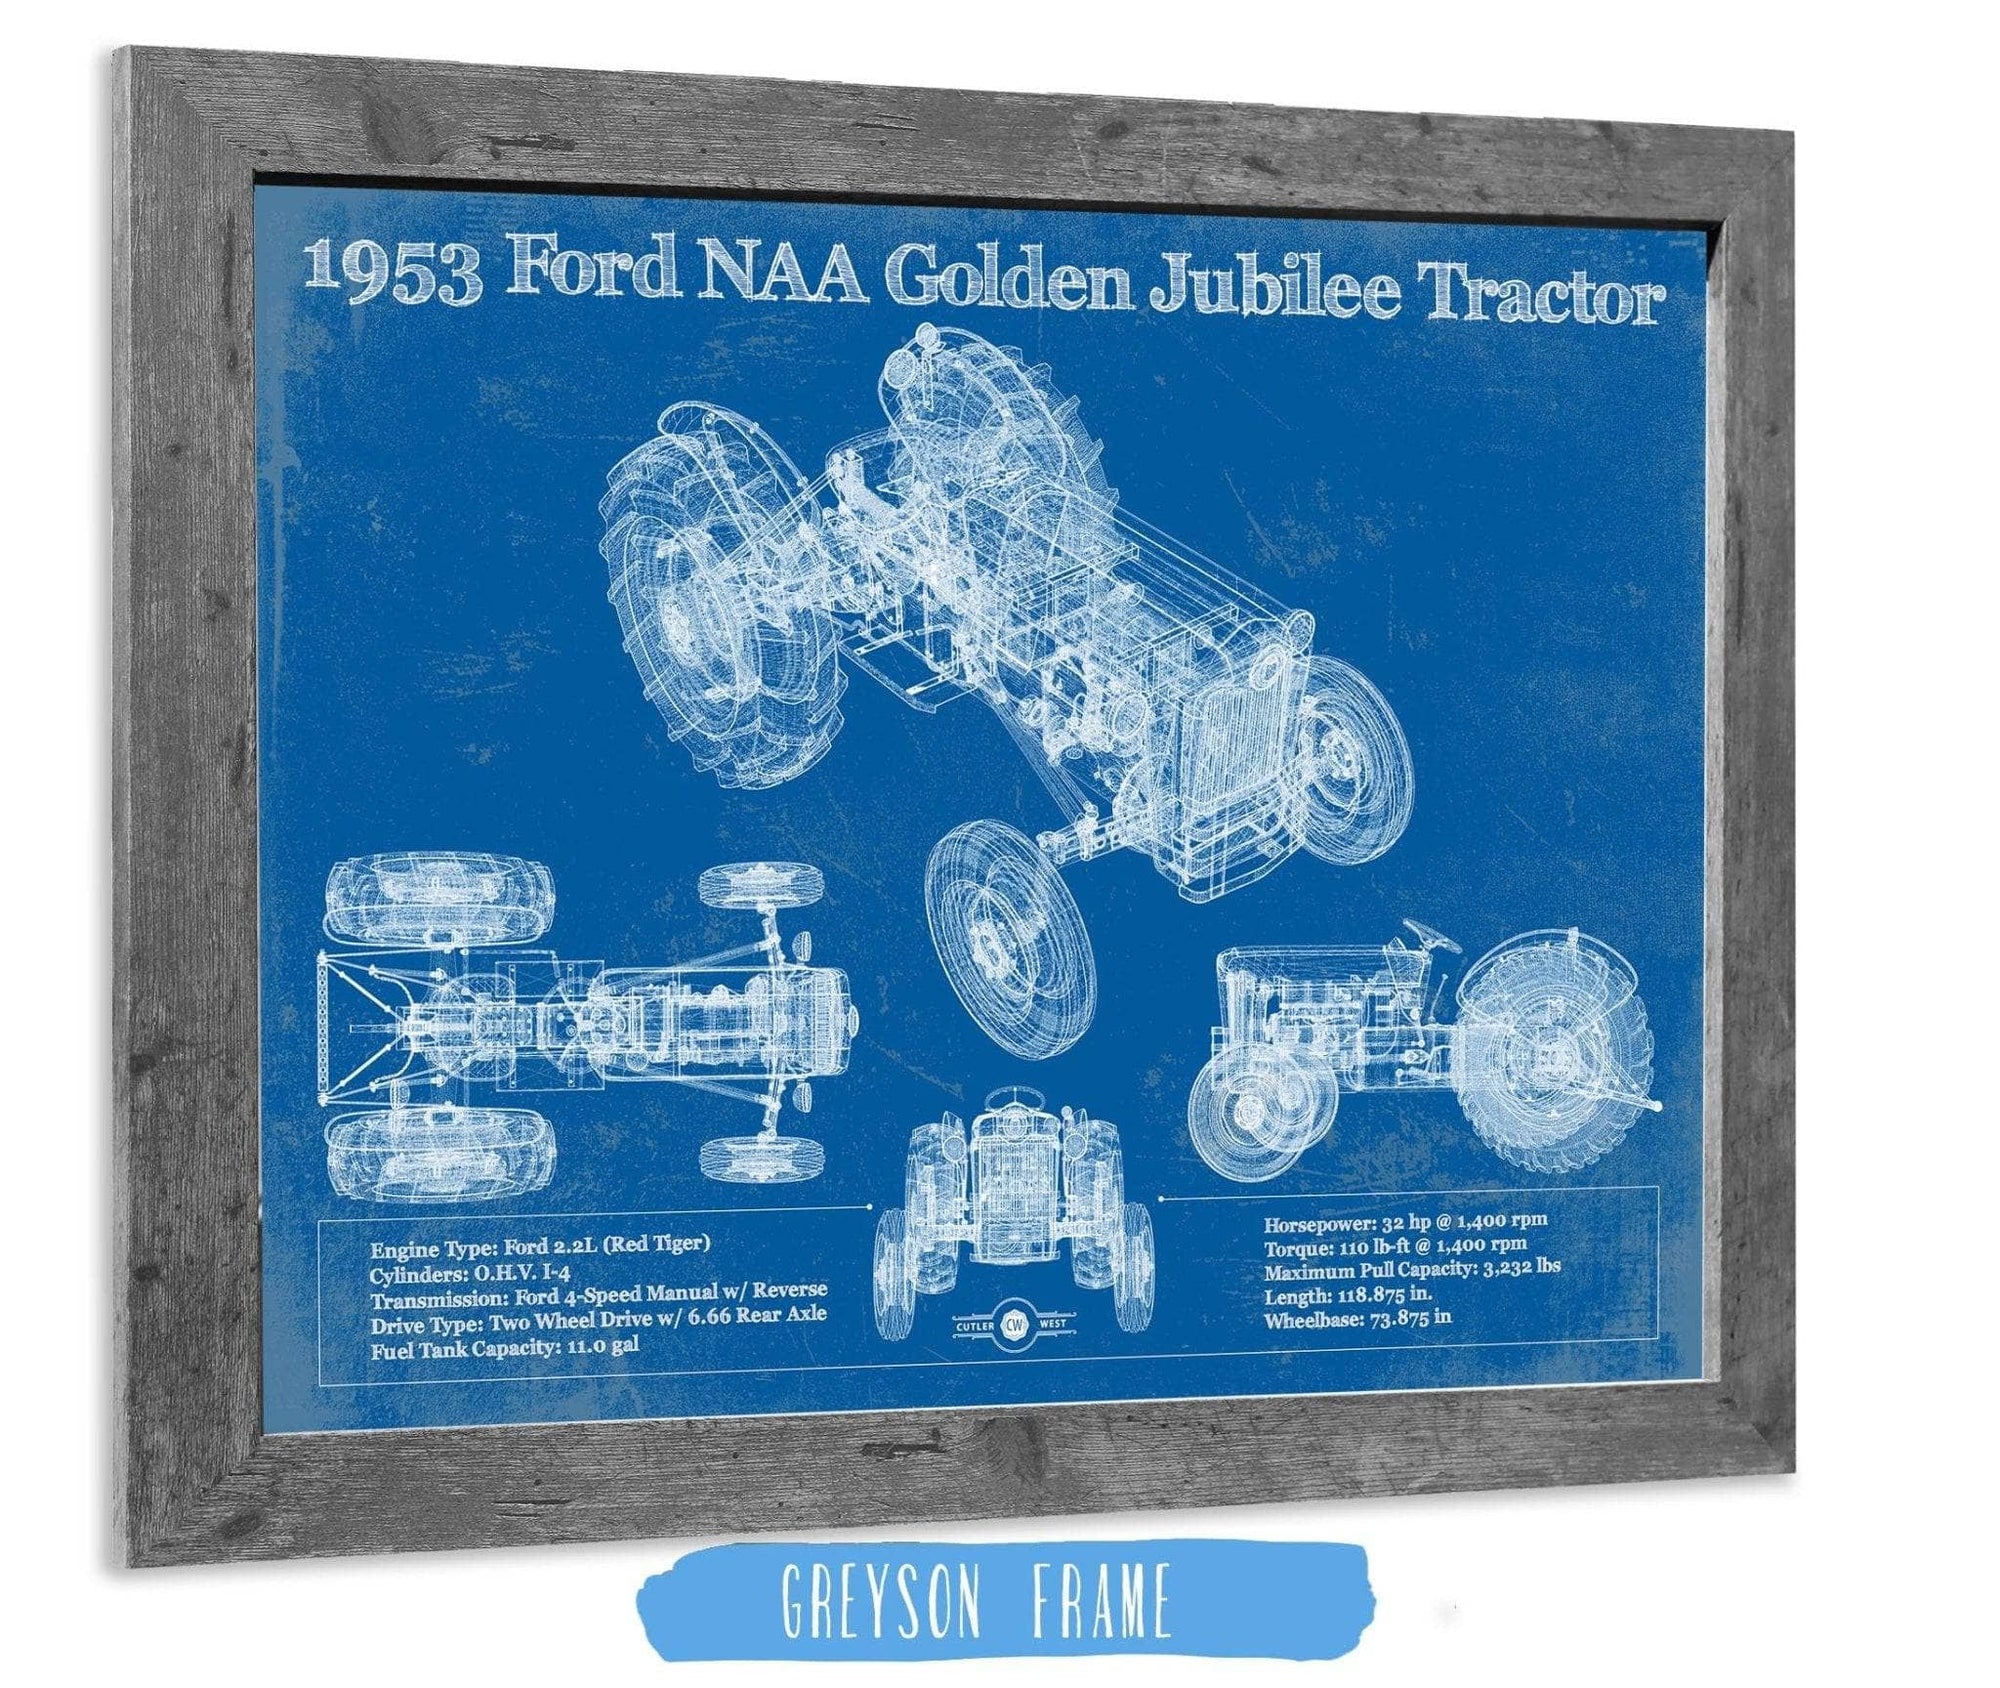 Cutler West Ford Collection 14" x 11" / Greyson Frame 1953 Ford NAA Golden Jubilee Blueprint Vintage Tractor Patent Print 933311092_32113